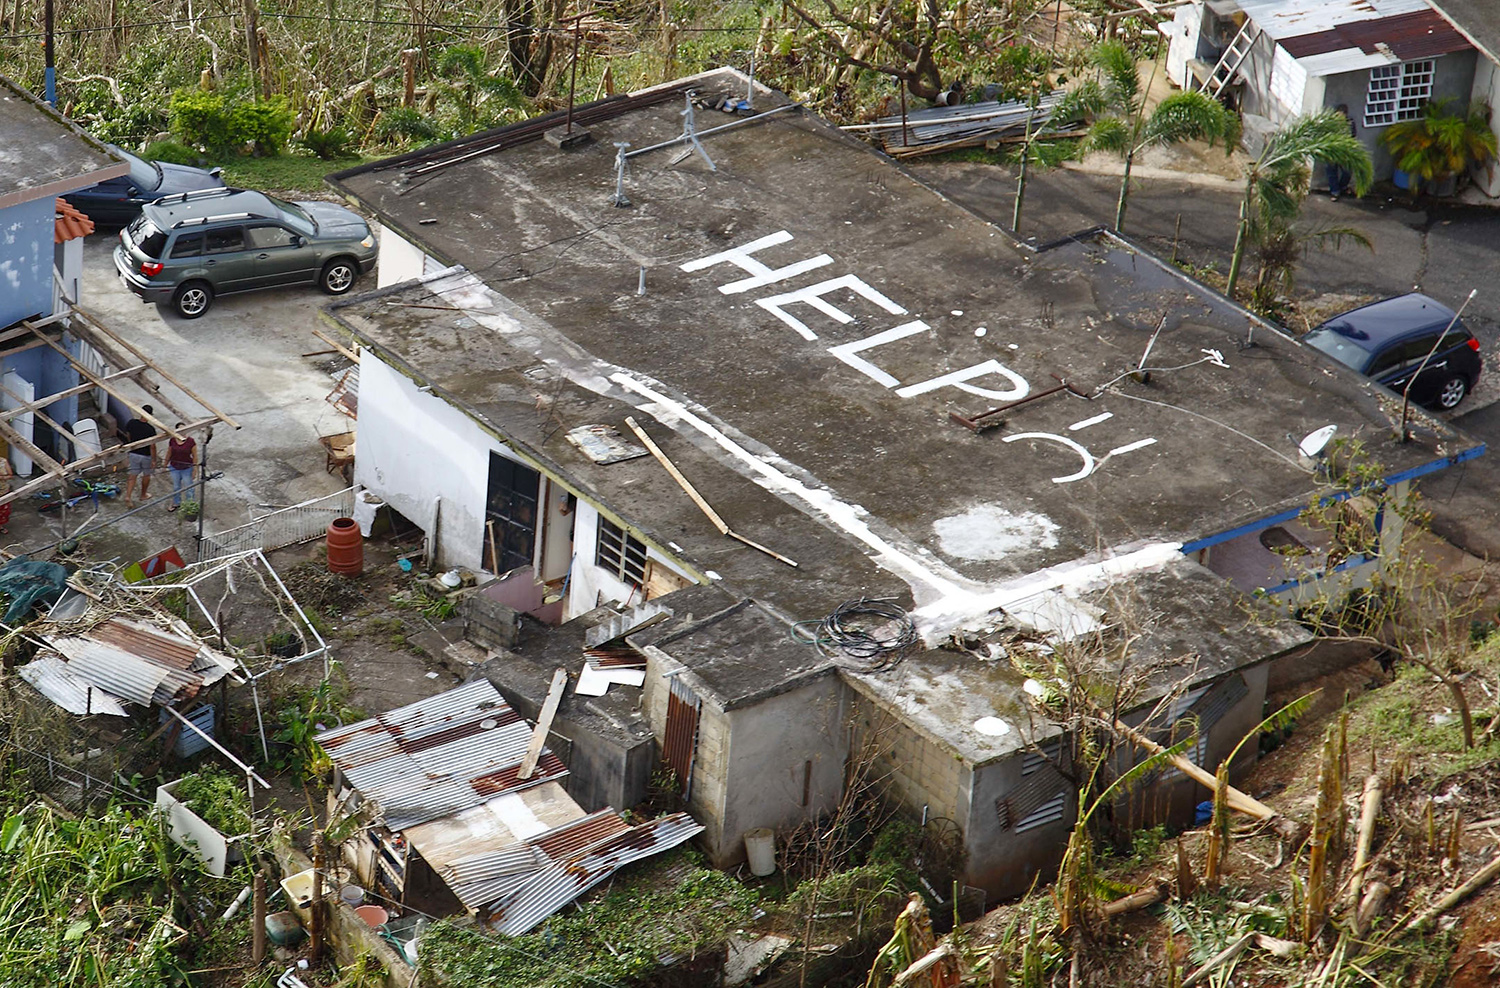 A house in Puerto Rico is seen from the air. Someone has written “Help” in white on the roof for rescue airplanes and helicopters to see. There is debris and fallen vegetation around the house.